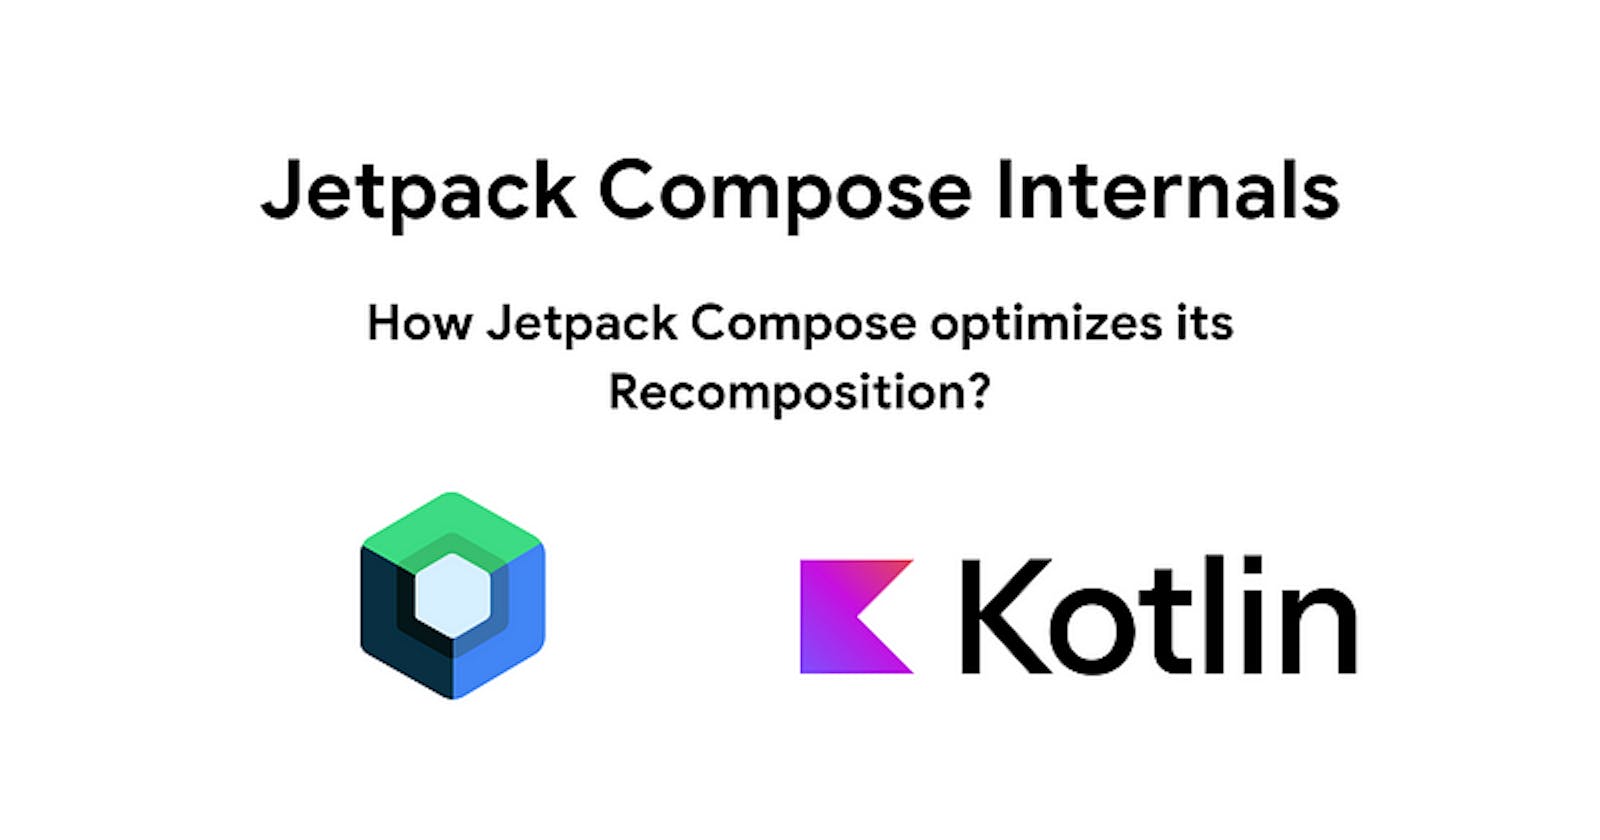 How Jetpack Compose optimizes its Recomposition?